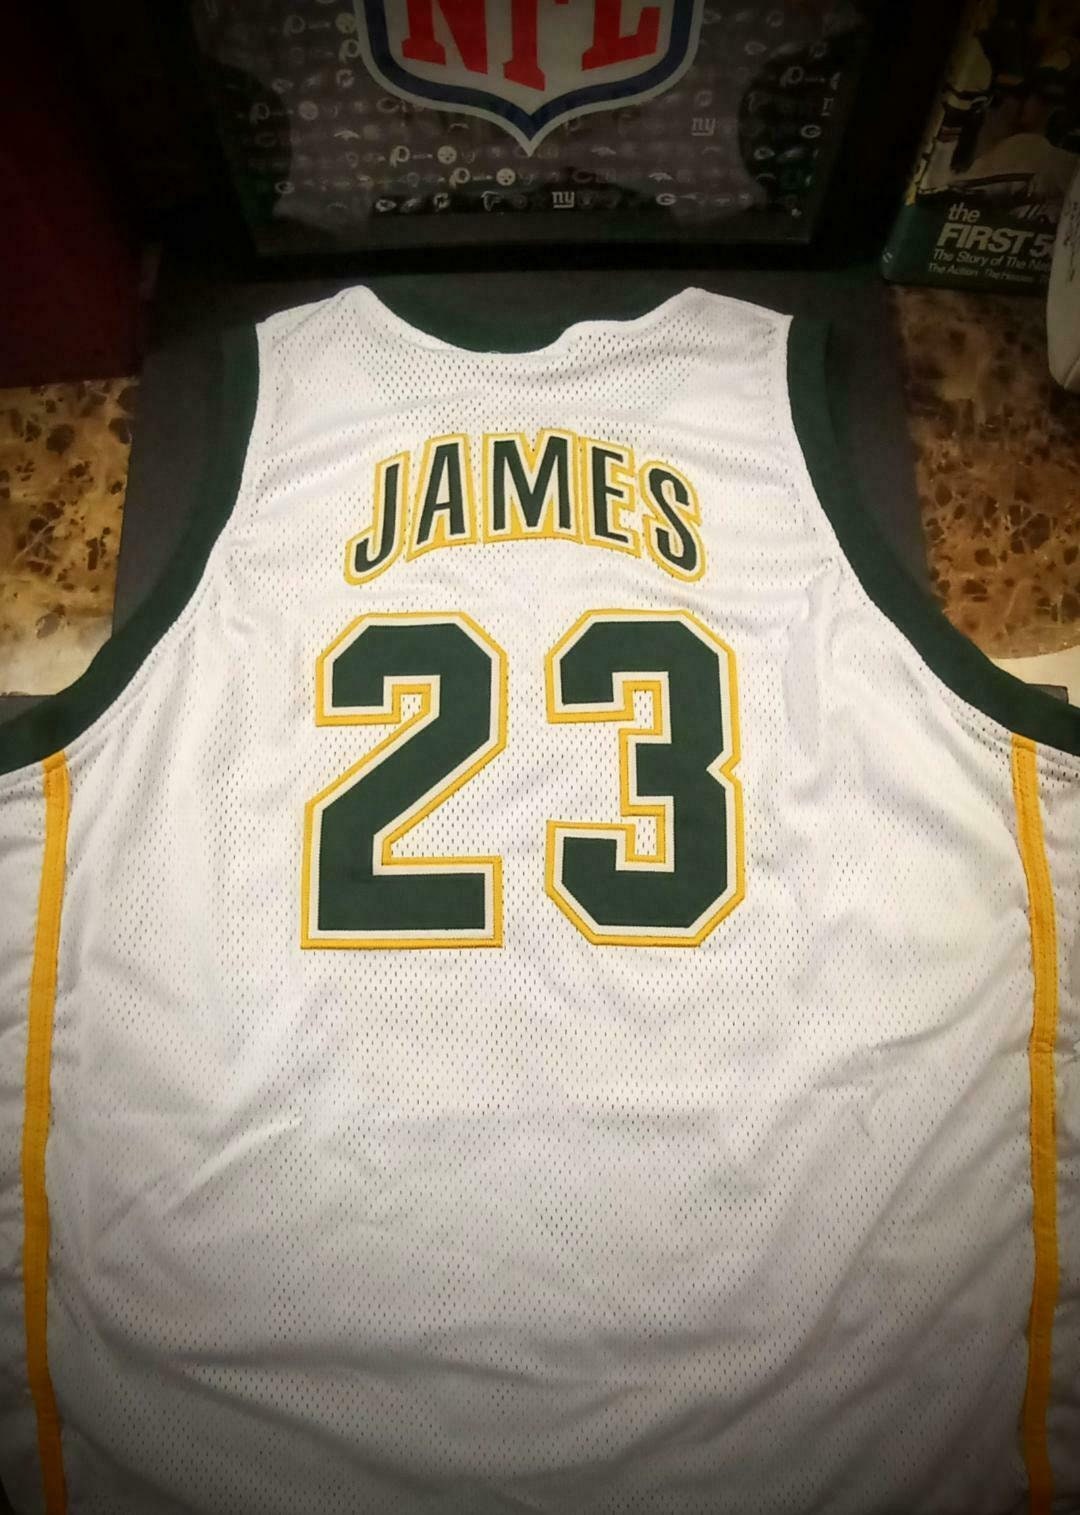 Wholesale Dropshipping Amzon  Best Seller N-B-a Retro Jersey  Mitchell&Ness Cleveland Cavaliers Lebron-James No. 23 Emboridered Stitched  Shirt Vest - China Wholesale Dropshipping N-B-a Retro Jerseys and James No.  23 Emboridered Stitched